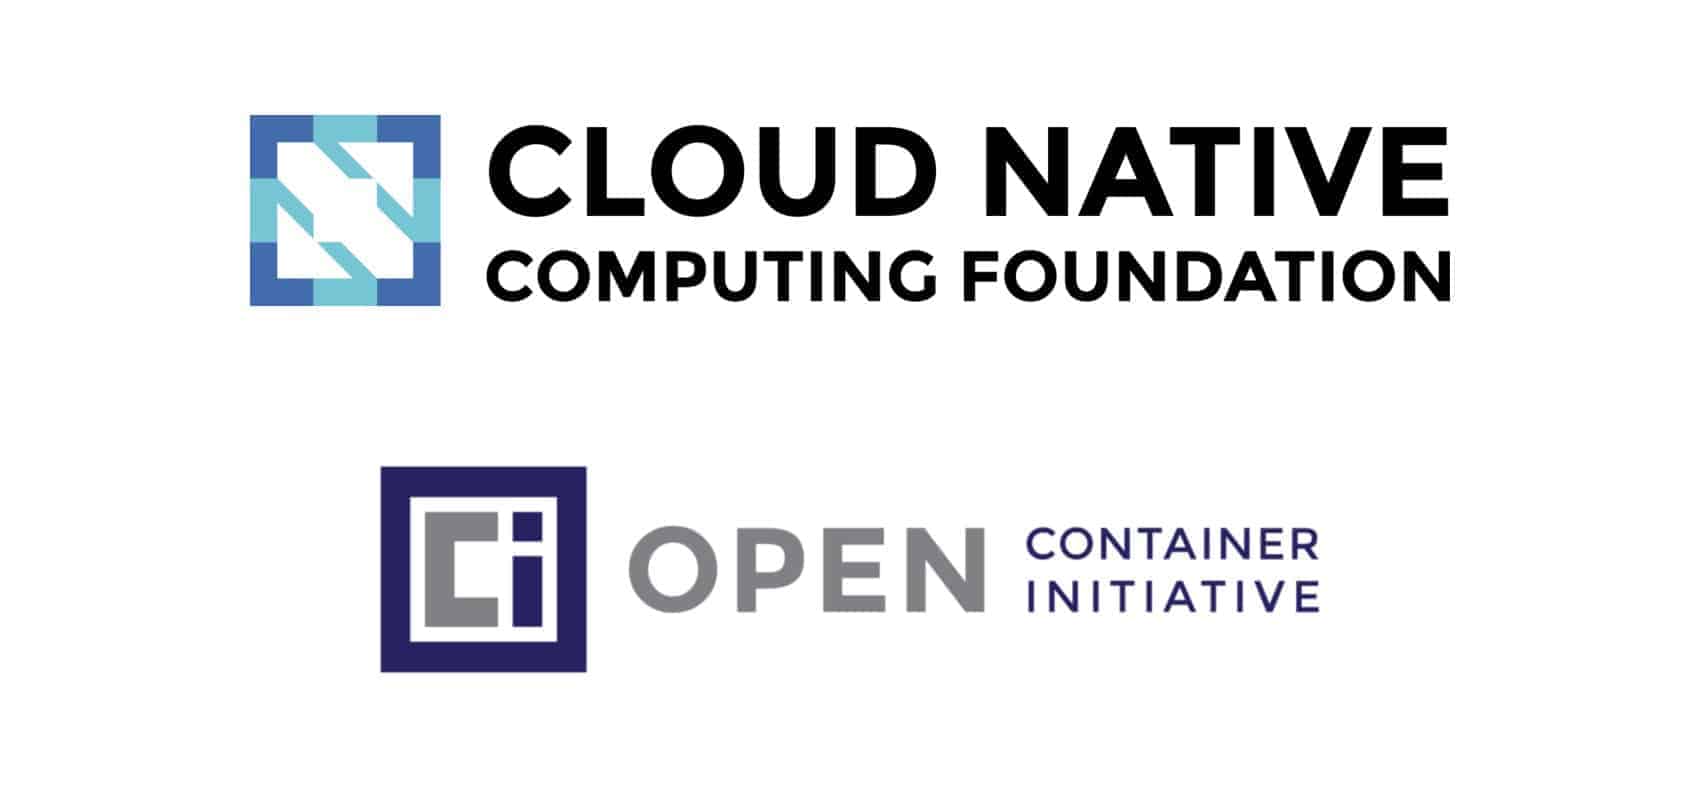 Cloud Native Computing Foundation | Open Container Initiative